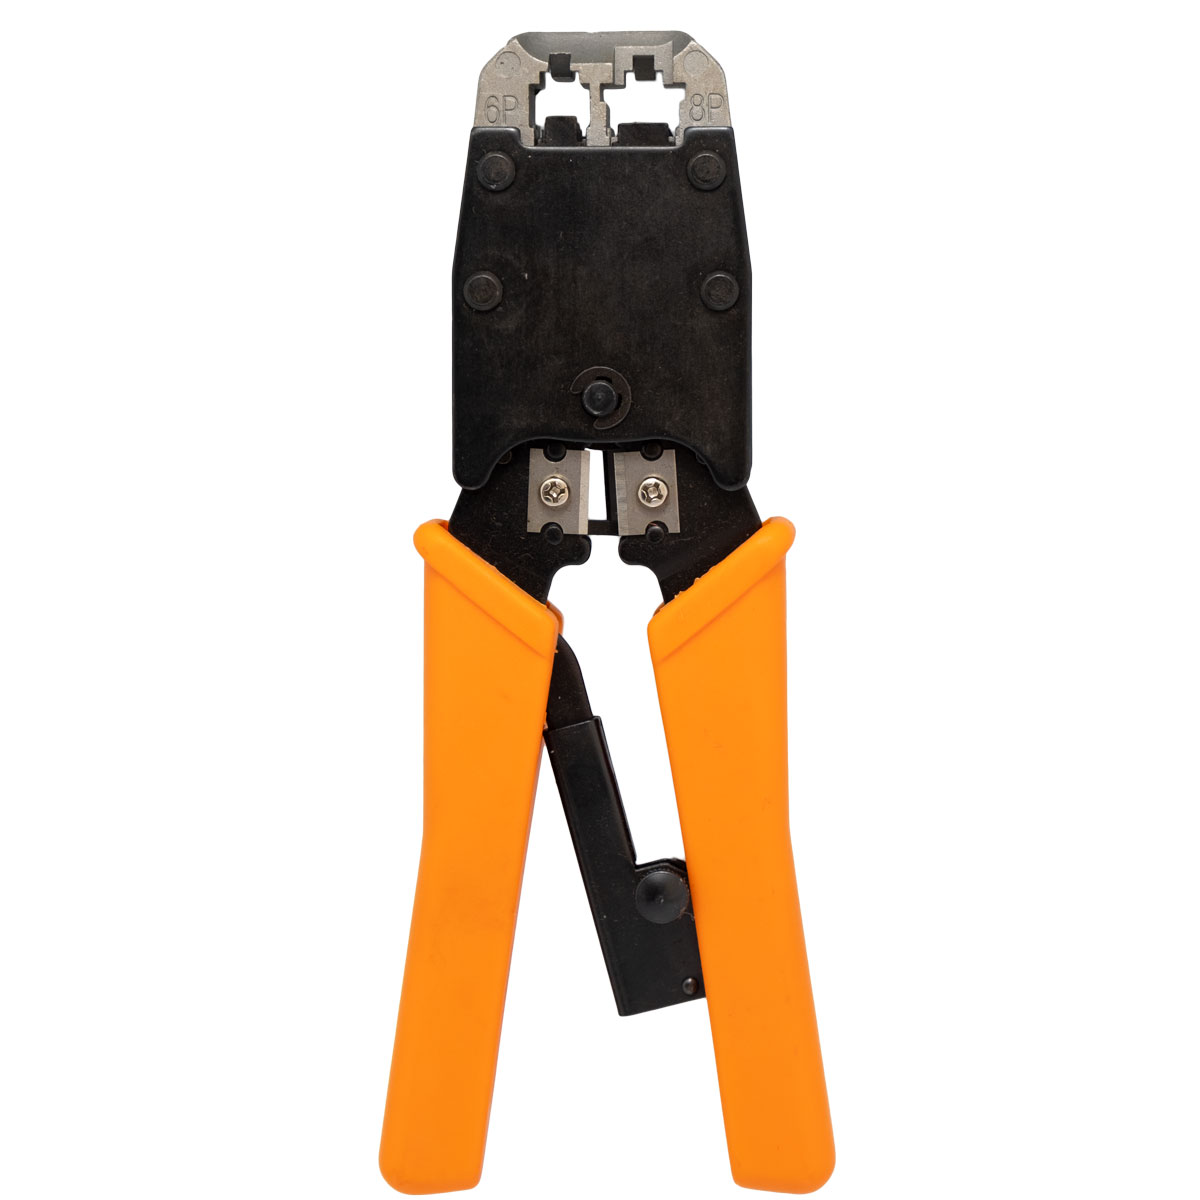 DUAL-MODULAR PLUG CRIMPS, STRIPS & CUTS TOOL, THE SAME AS THE 3236 BUT WITH RATCHET